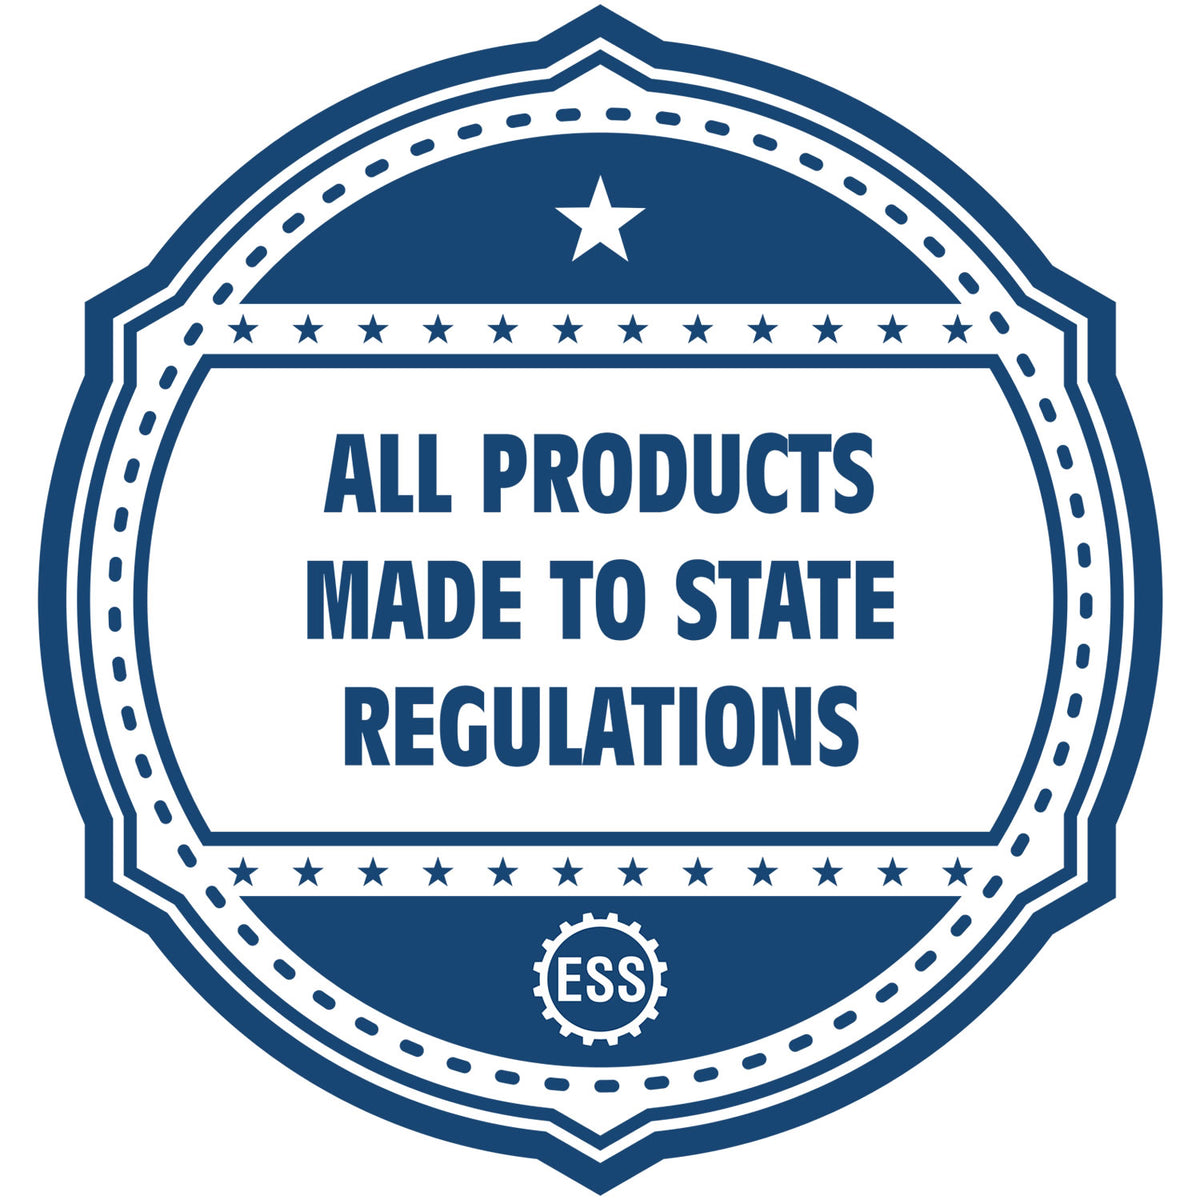 An icon or badge element for the Soft North Dakota Professional Engineer Seal showing that this product is made in compliance with state regulations.